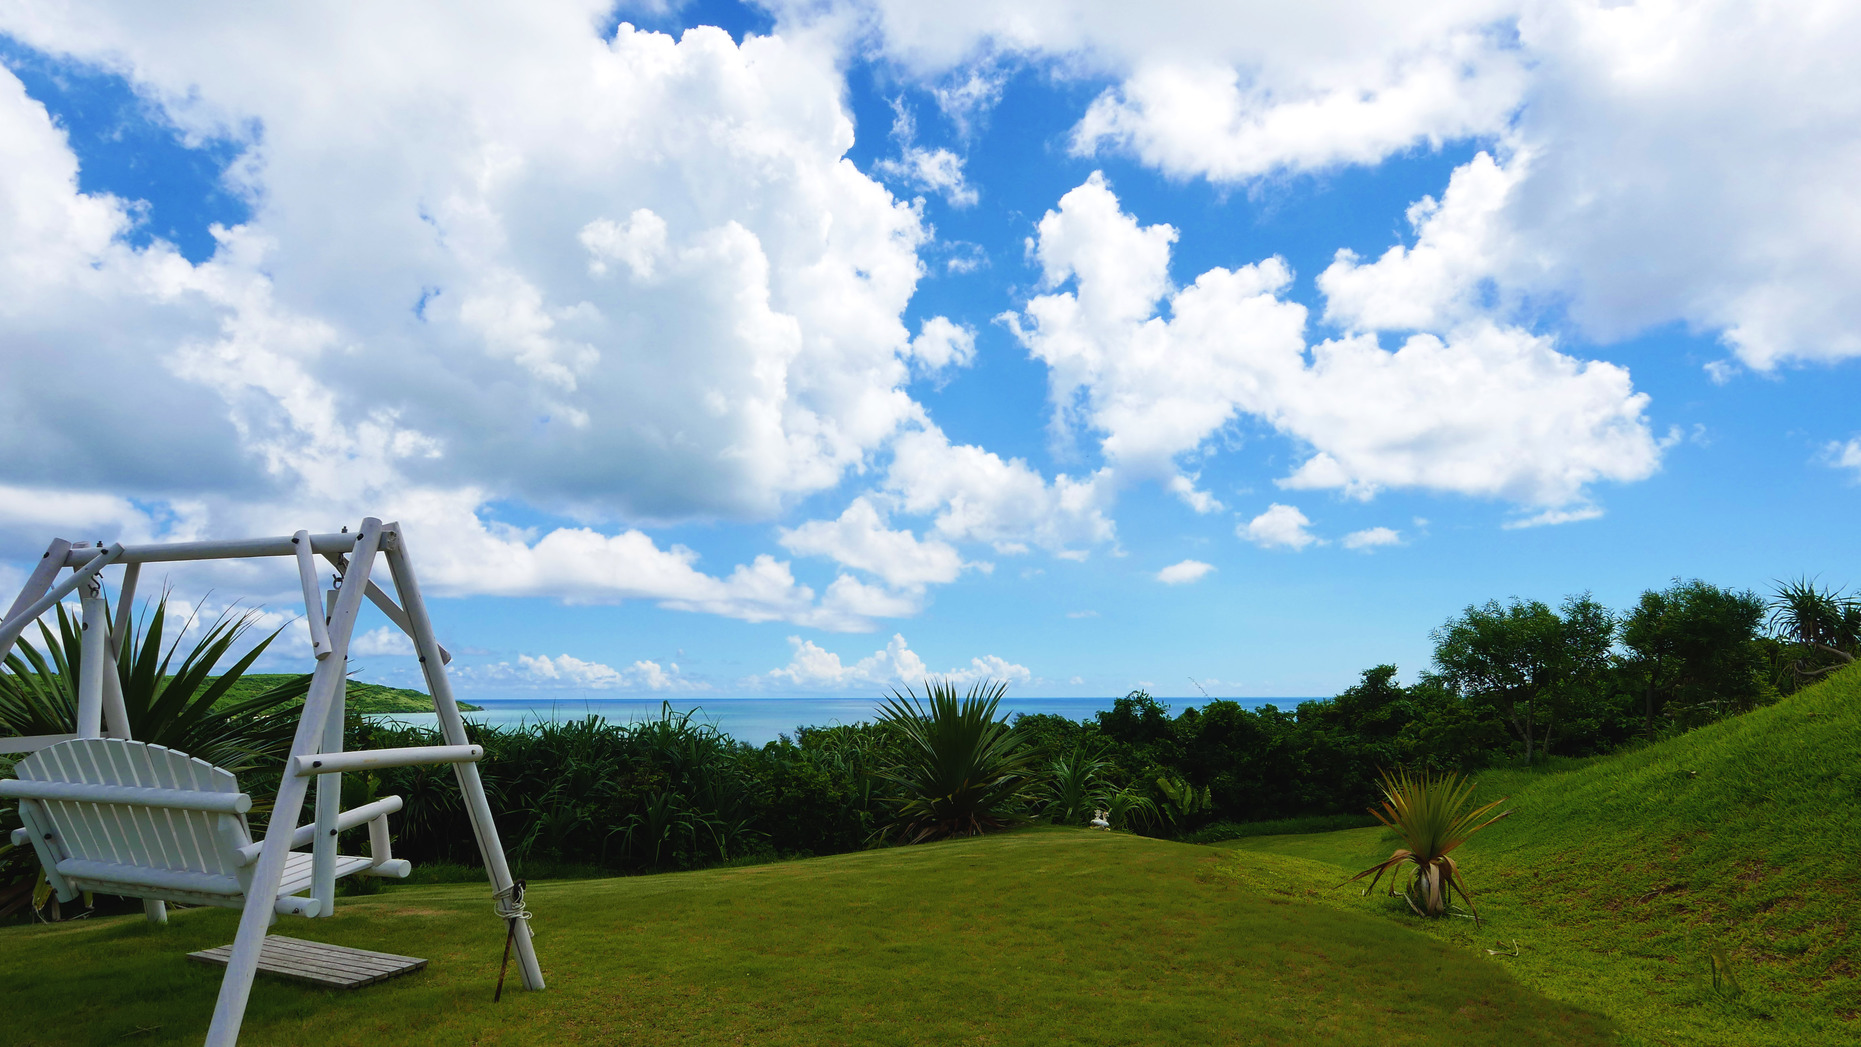 Villa Elilai Miyakojima VILLA ELILAI MIYAKOJIMA (Miyakojima) is conveniently located in the popular Miyako Island area. The property has everything you need for a comfortable stay. Take advantage of the propertys free Wi-Fi